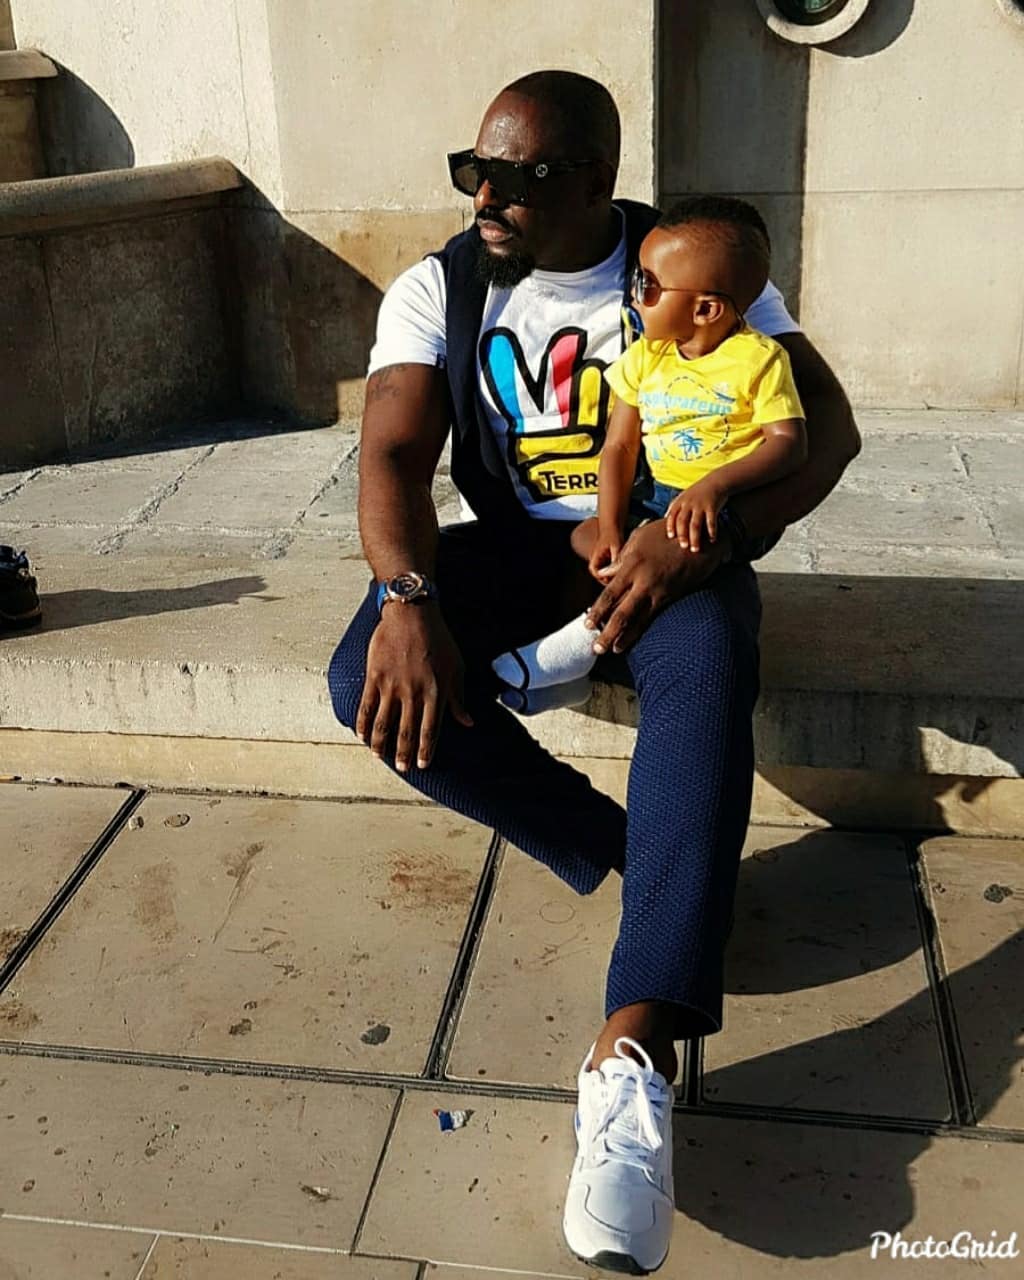 Actor, Jim Iyke visits the Eiffel Tower with his son, Harvis